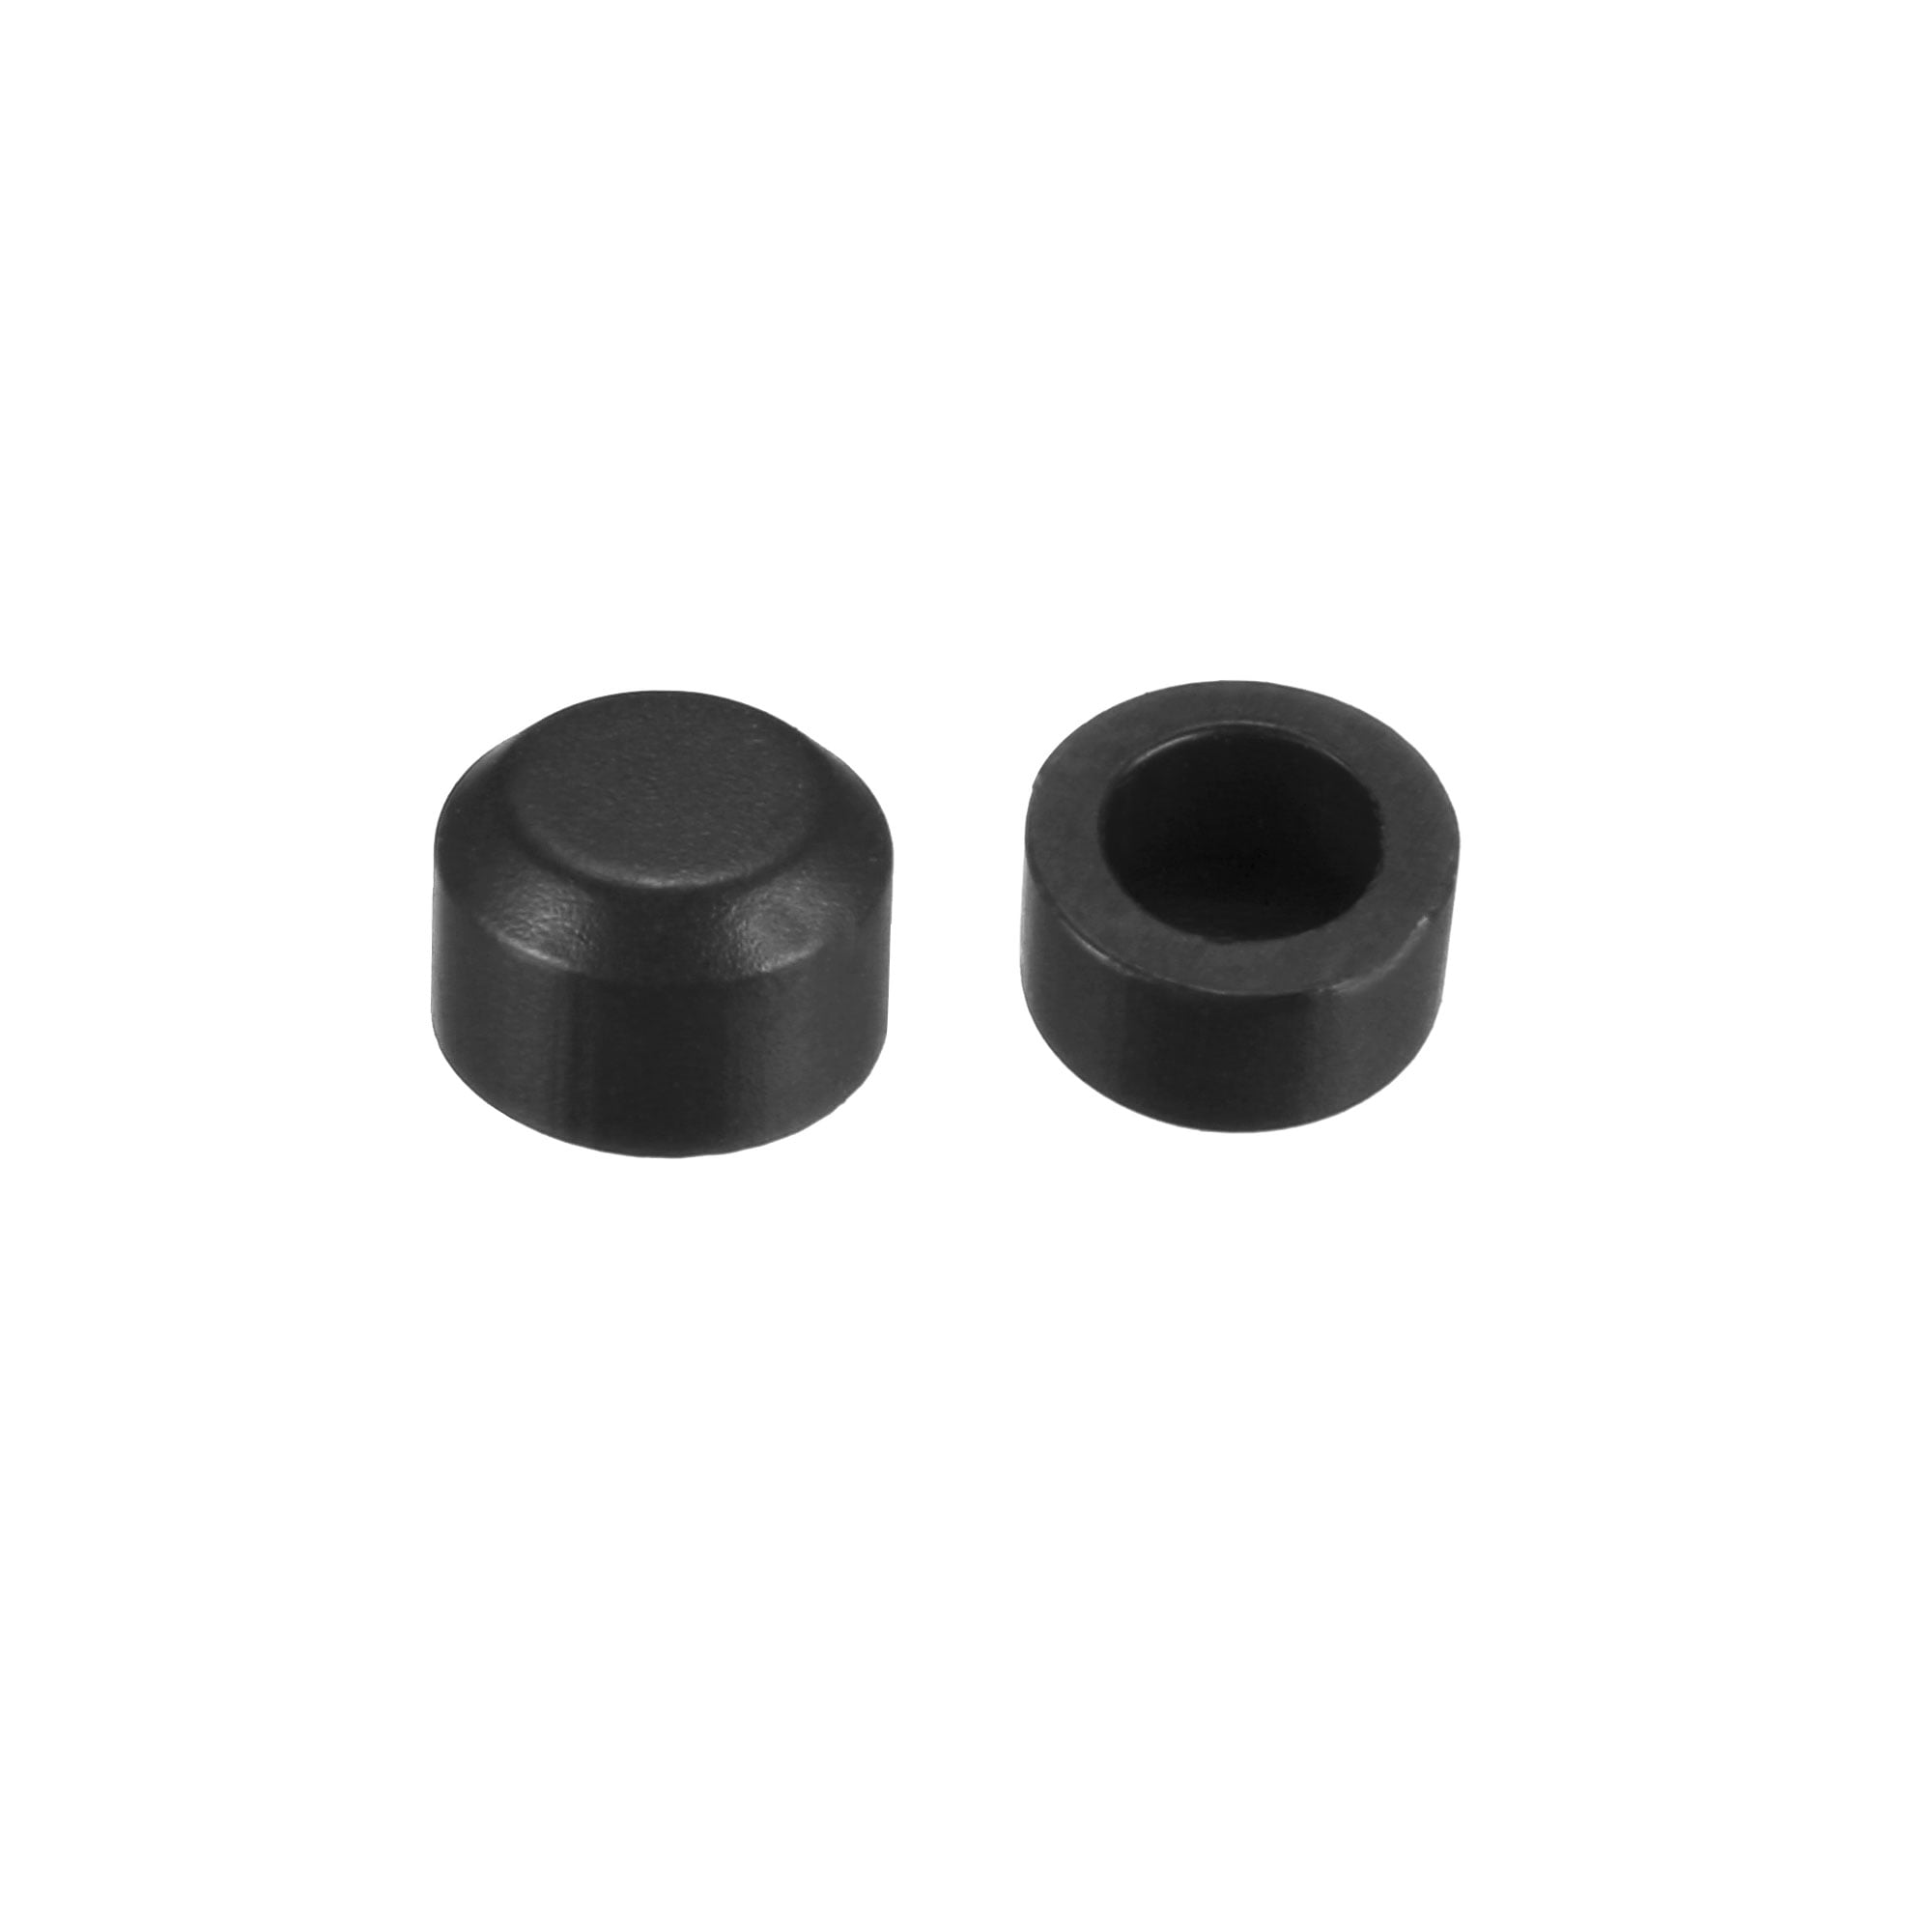 30Pcs 3.2mm Hole Dia Tactile Switch Caps Cover Black for 6x6 Micro Switch 